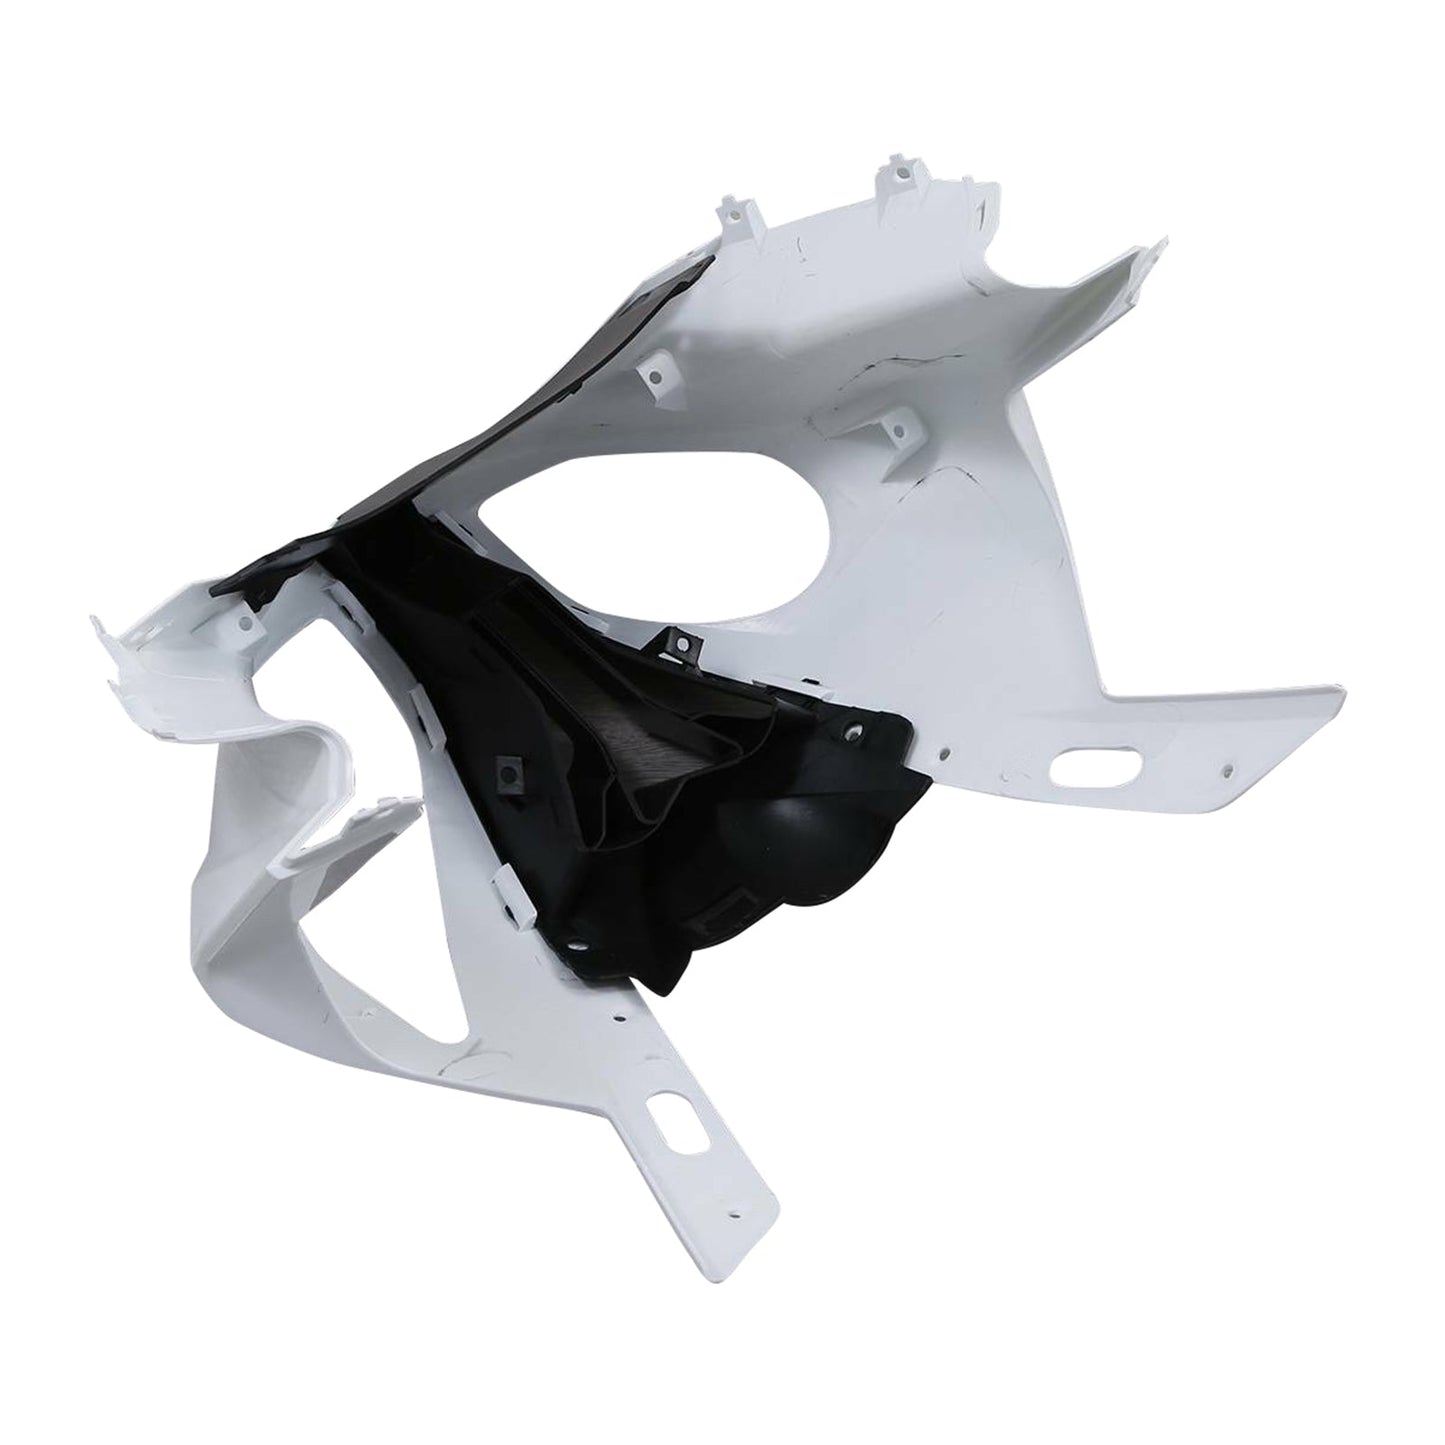 Amotopart BMW S1000RR 2017-2018 Fairing Injection Molding Unpainted